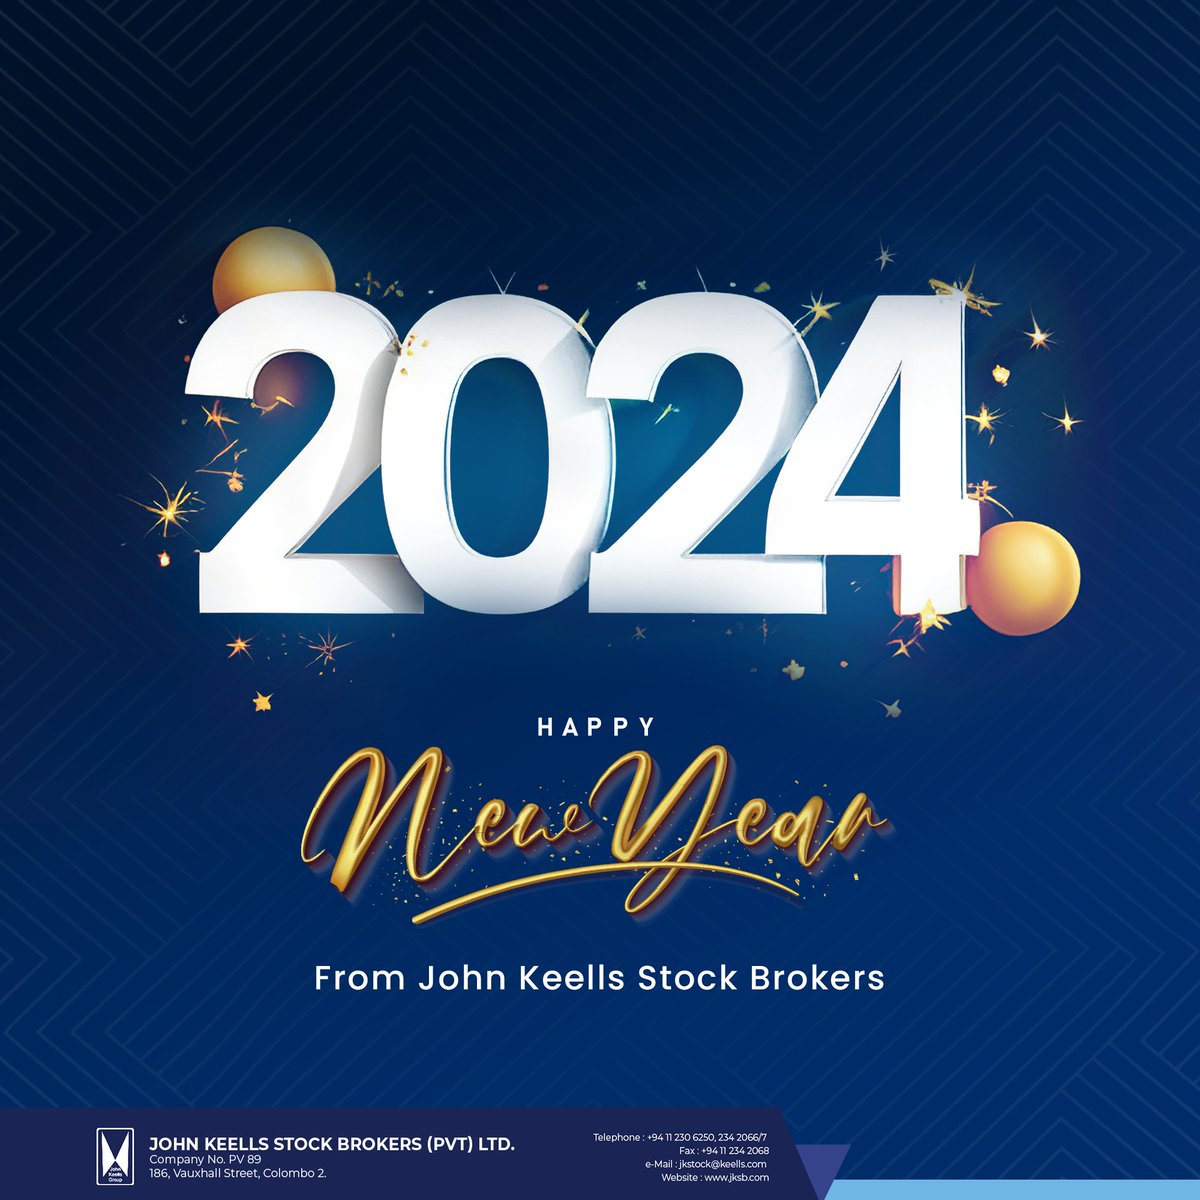 Wishing everyone a Prosperous New Year! May 2024 be a year of insightful investing and remarkable growth with JKSB. 🌟📈

#HappyNewYear #TeamJKSB #GrowthTogether #JKSB